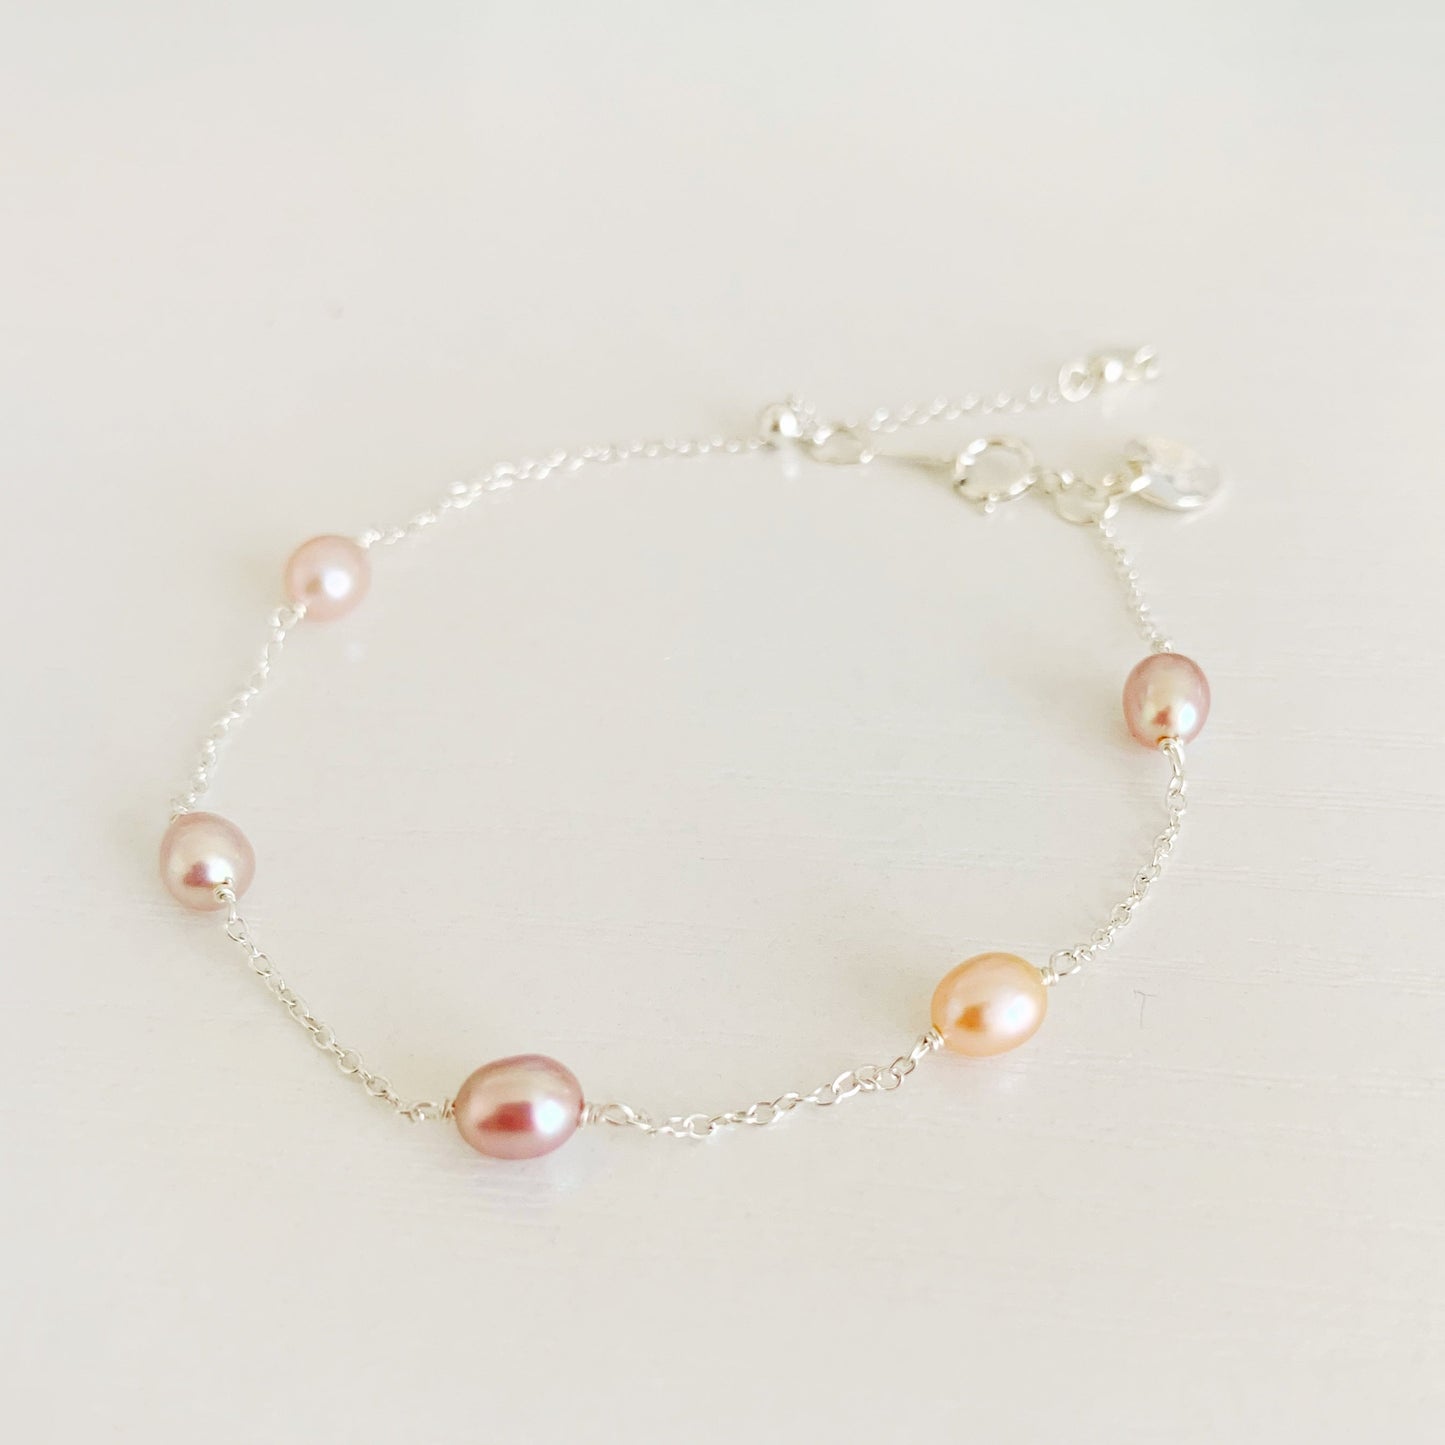 block island bracelet by mermaid and madeleines features natural pink color, small oval pearls in stations on sterling silver chain. There's a slide bead near the clasp to adjust. the bracelet is photographed on a white surface